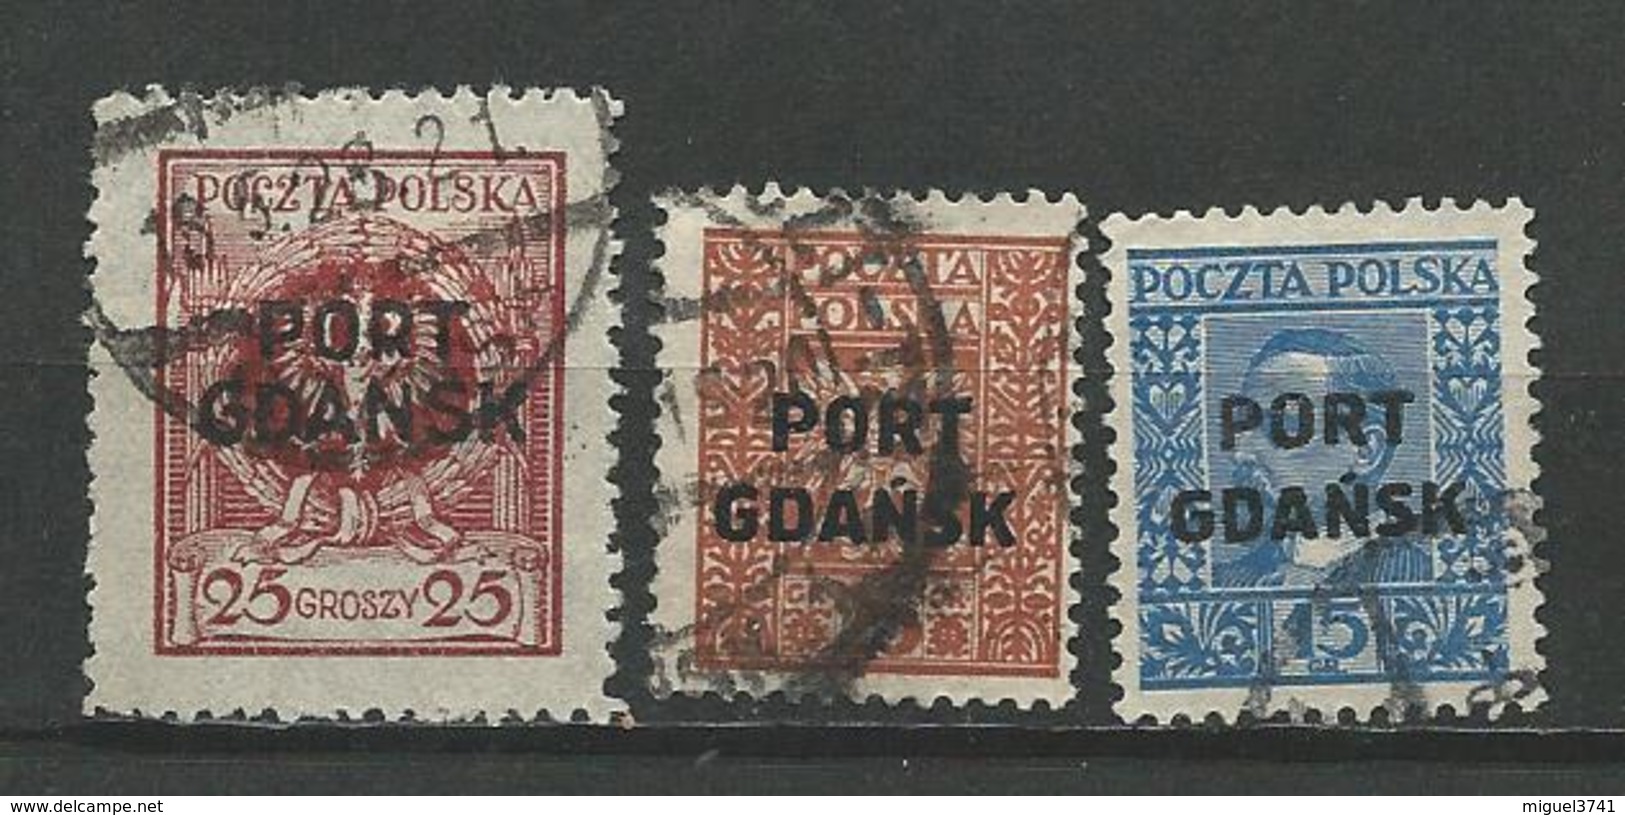 POLOGNE  ANNEE 1924  - 3 TIMBRES SURCHARGE PORT GDANSK OBLITERE VOIR SCAN - Usati